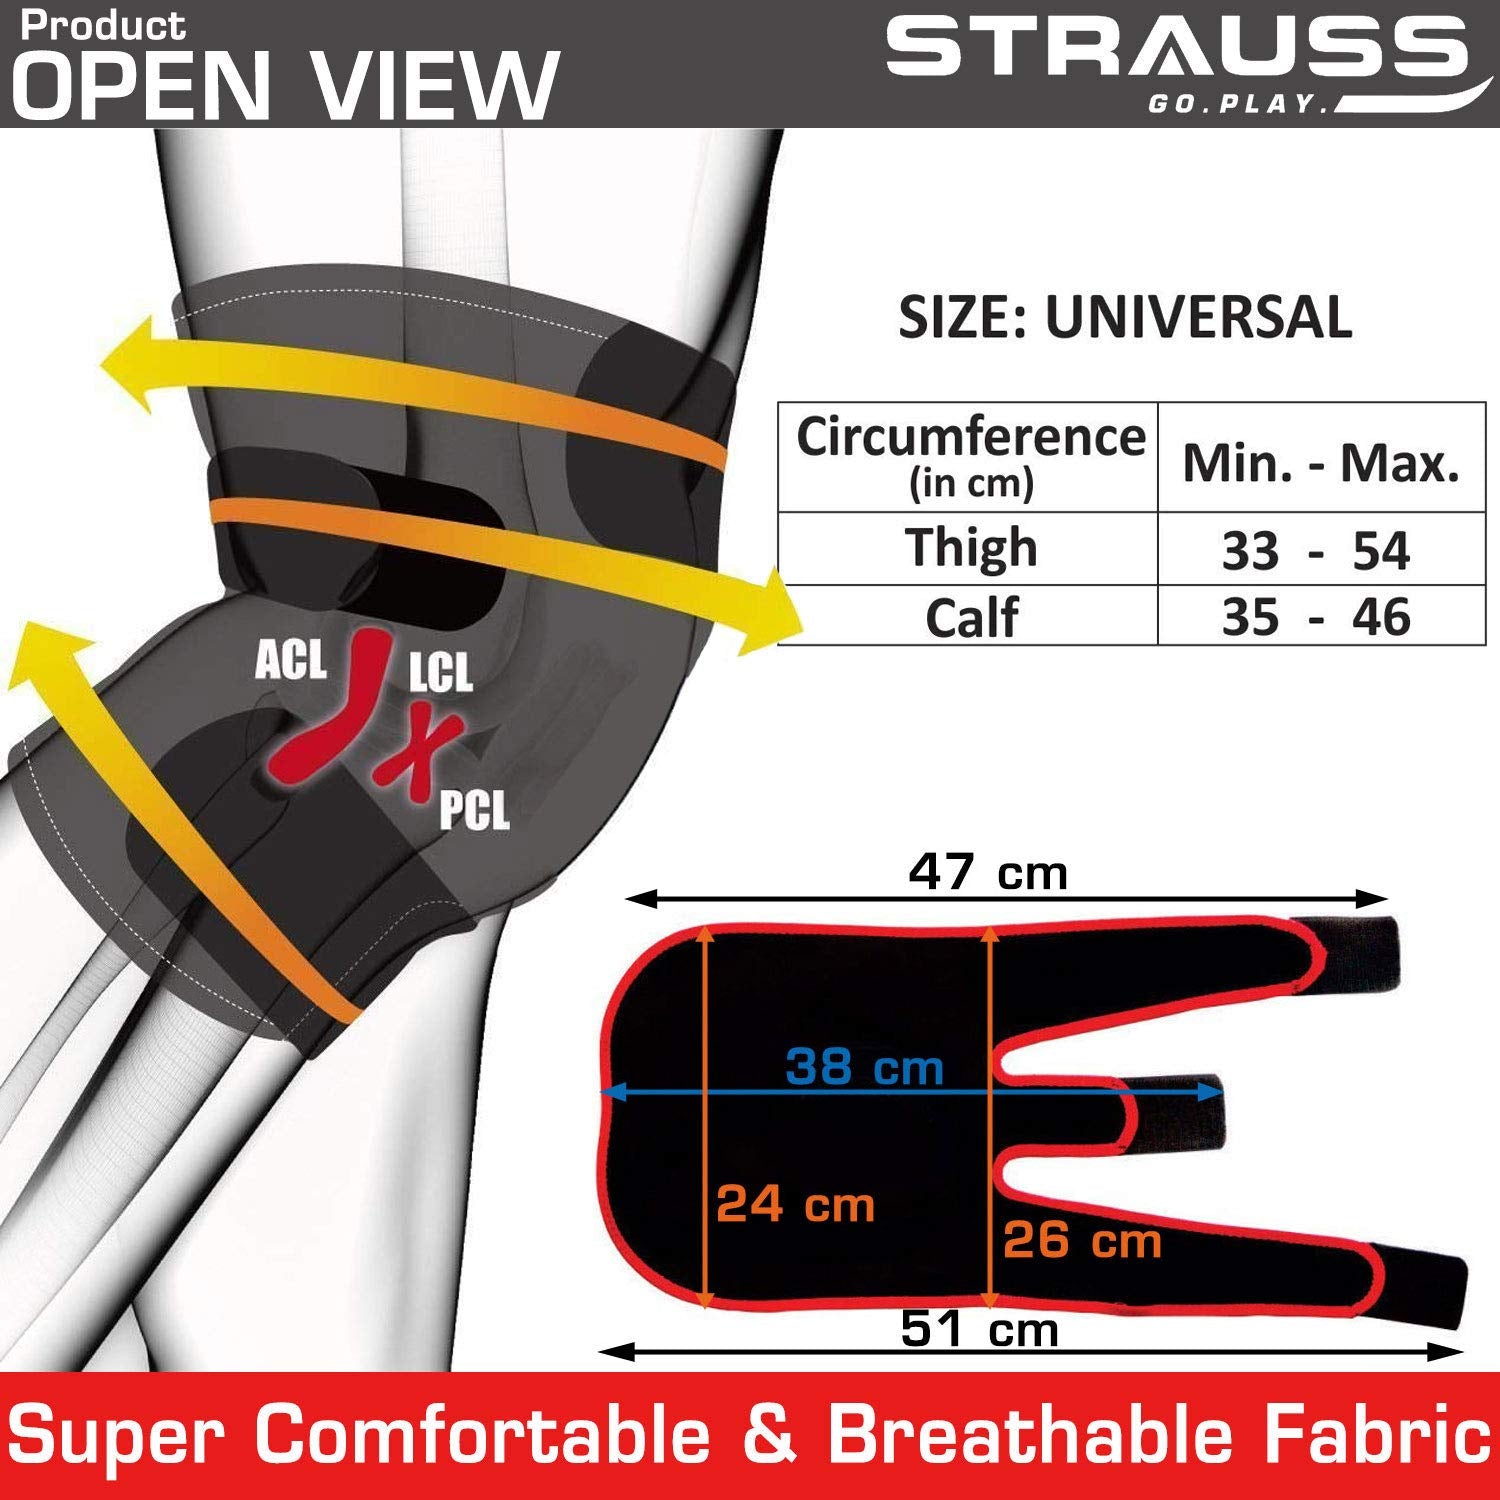 Strauss Adjustable Knee Support, Free Size (Black) and Wrist Support, Free Size (Black)